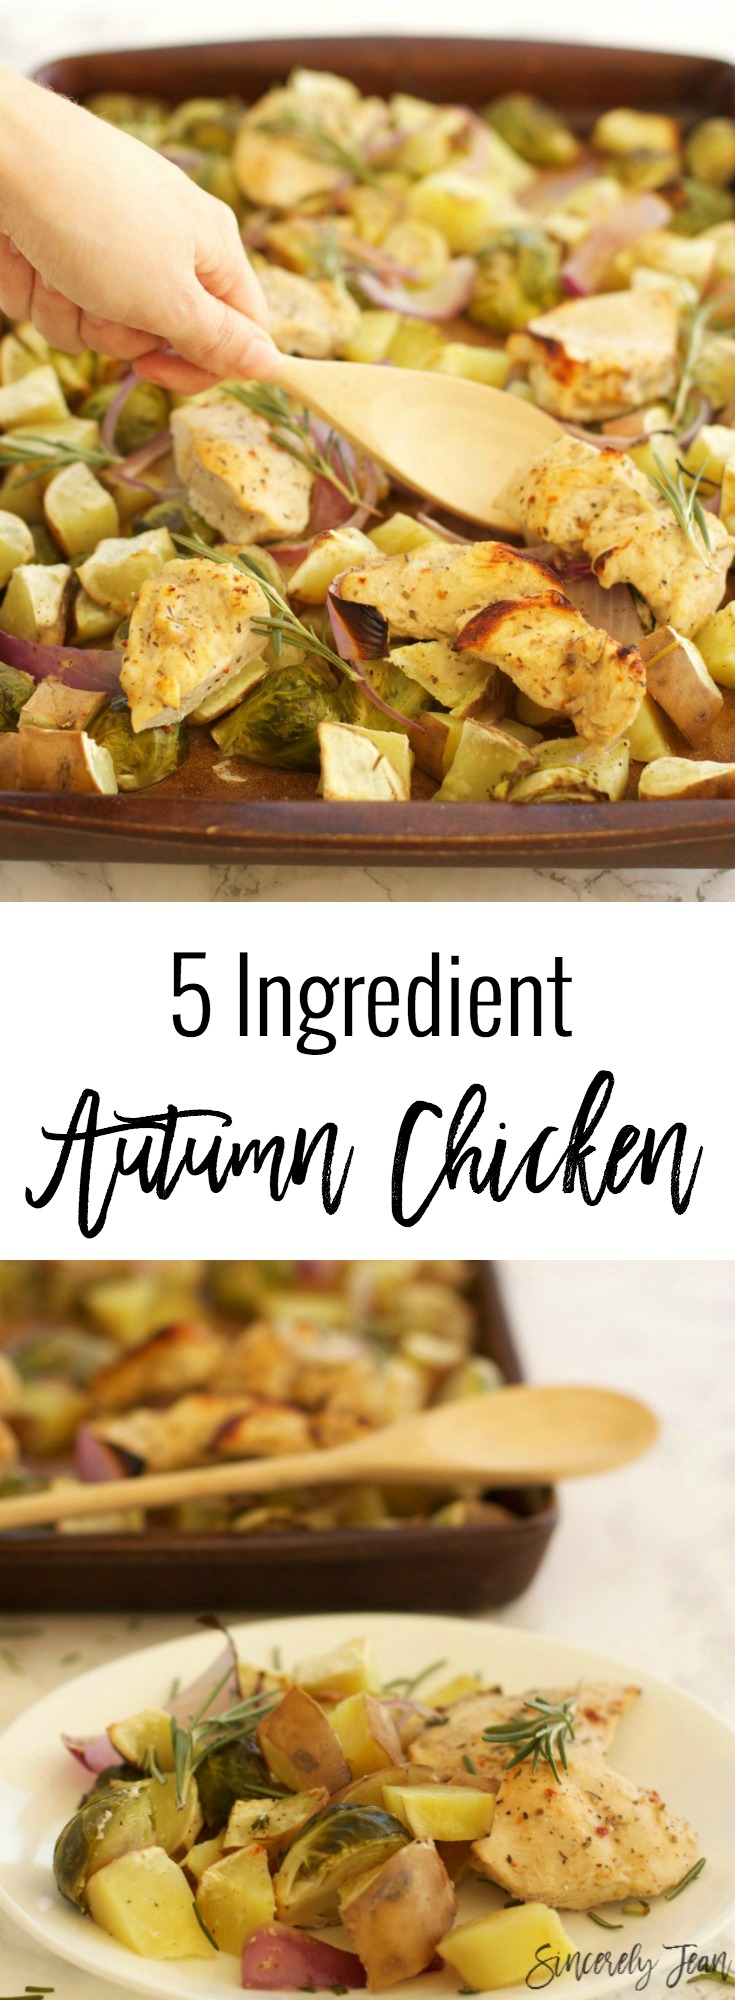 SIncerelyJean.com brings you Easy Fall Chicken with only 5 ingredients